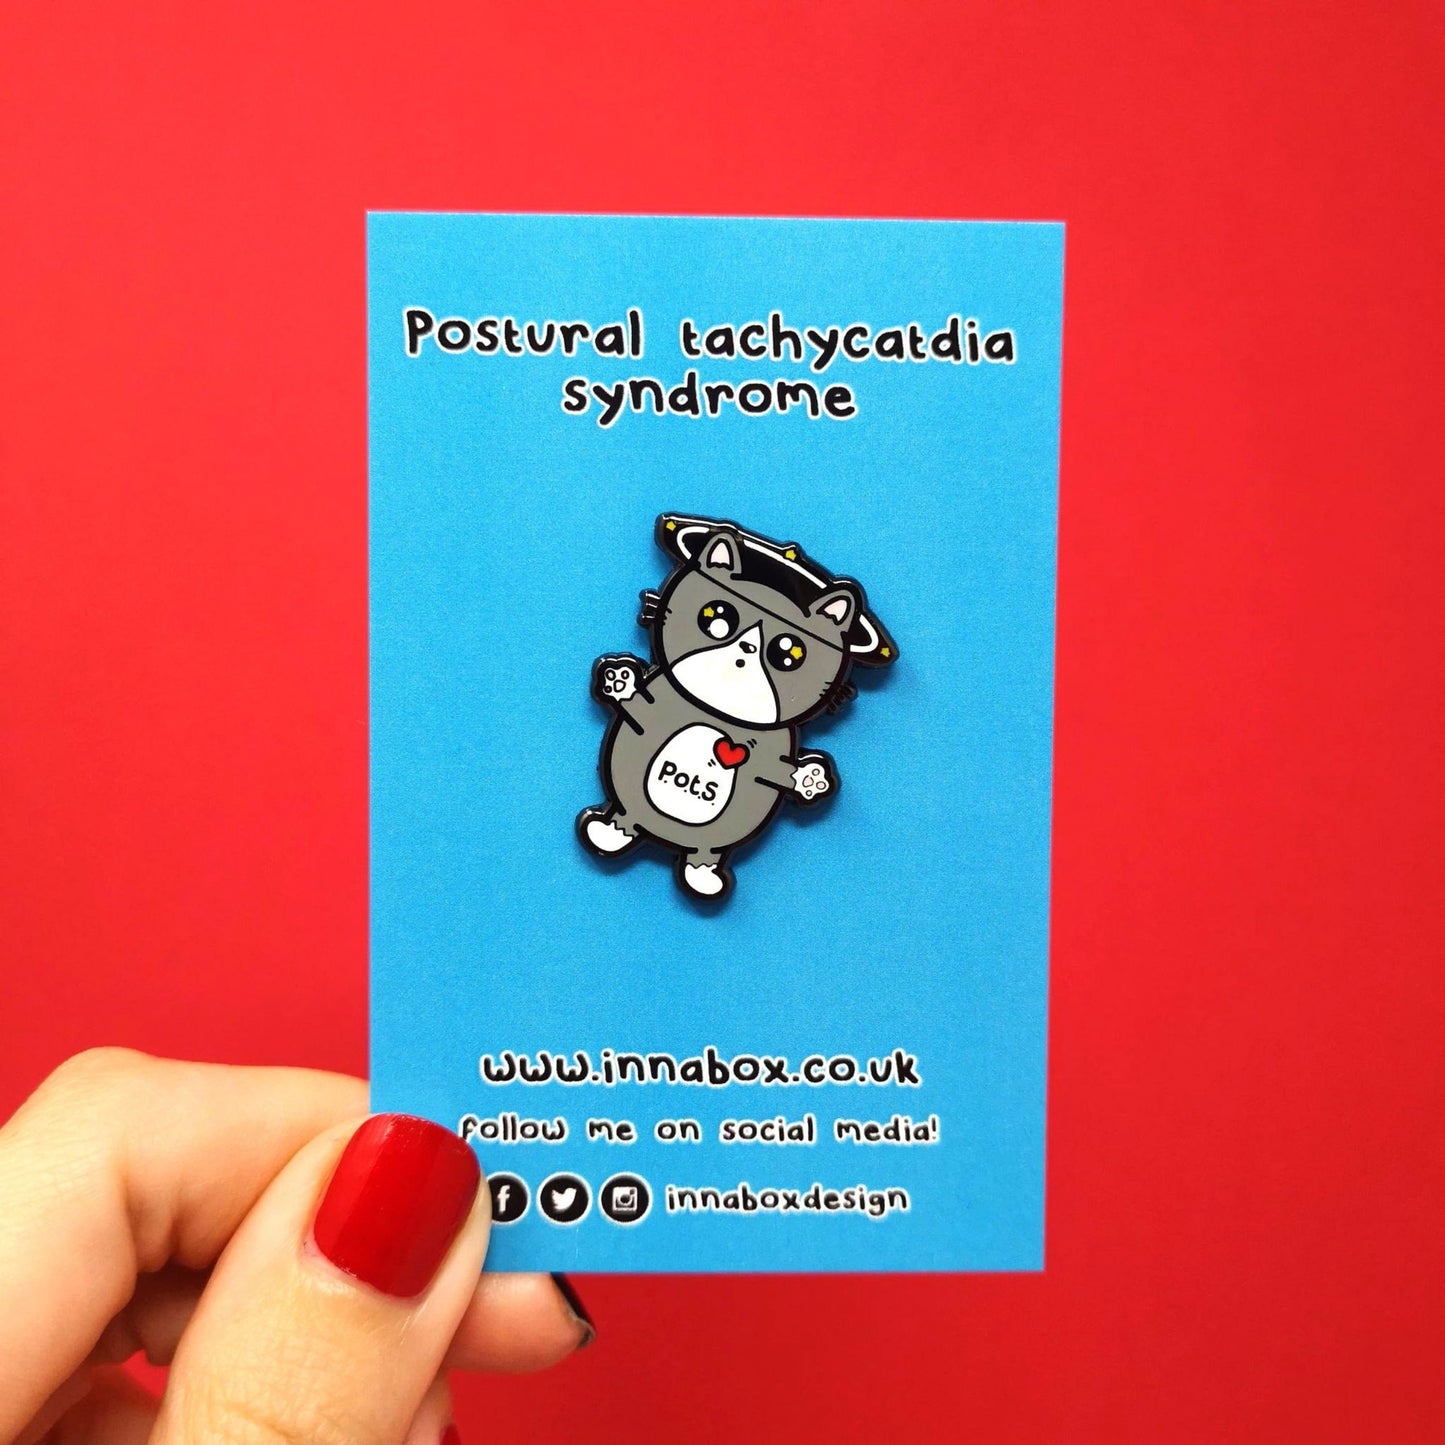 An enamel pin of a cat illustration with spinning dizzy stars around its head with its paws outstretched and postural tachycatdid syndrome (pots) written on its belly it is on a red background on a blue backing card with a hand holding it. Postural tachycardia syndrome (PoTS) is when your heart rate increases very quickly after getting up from sitting or lying down.